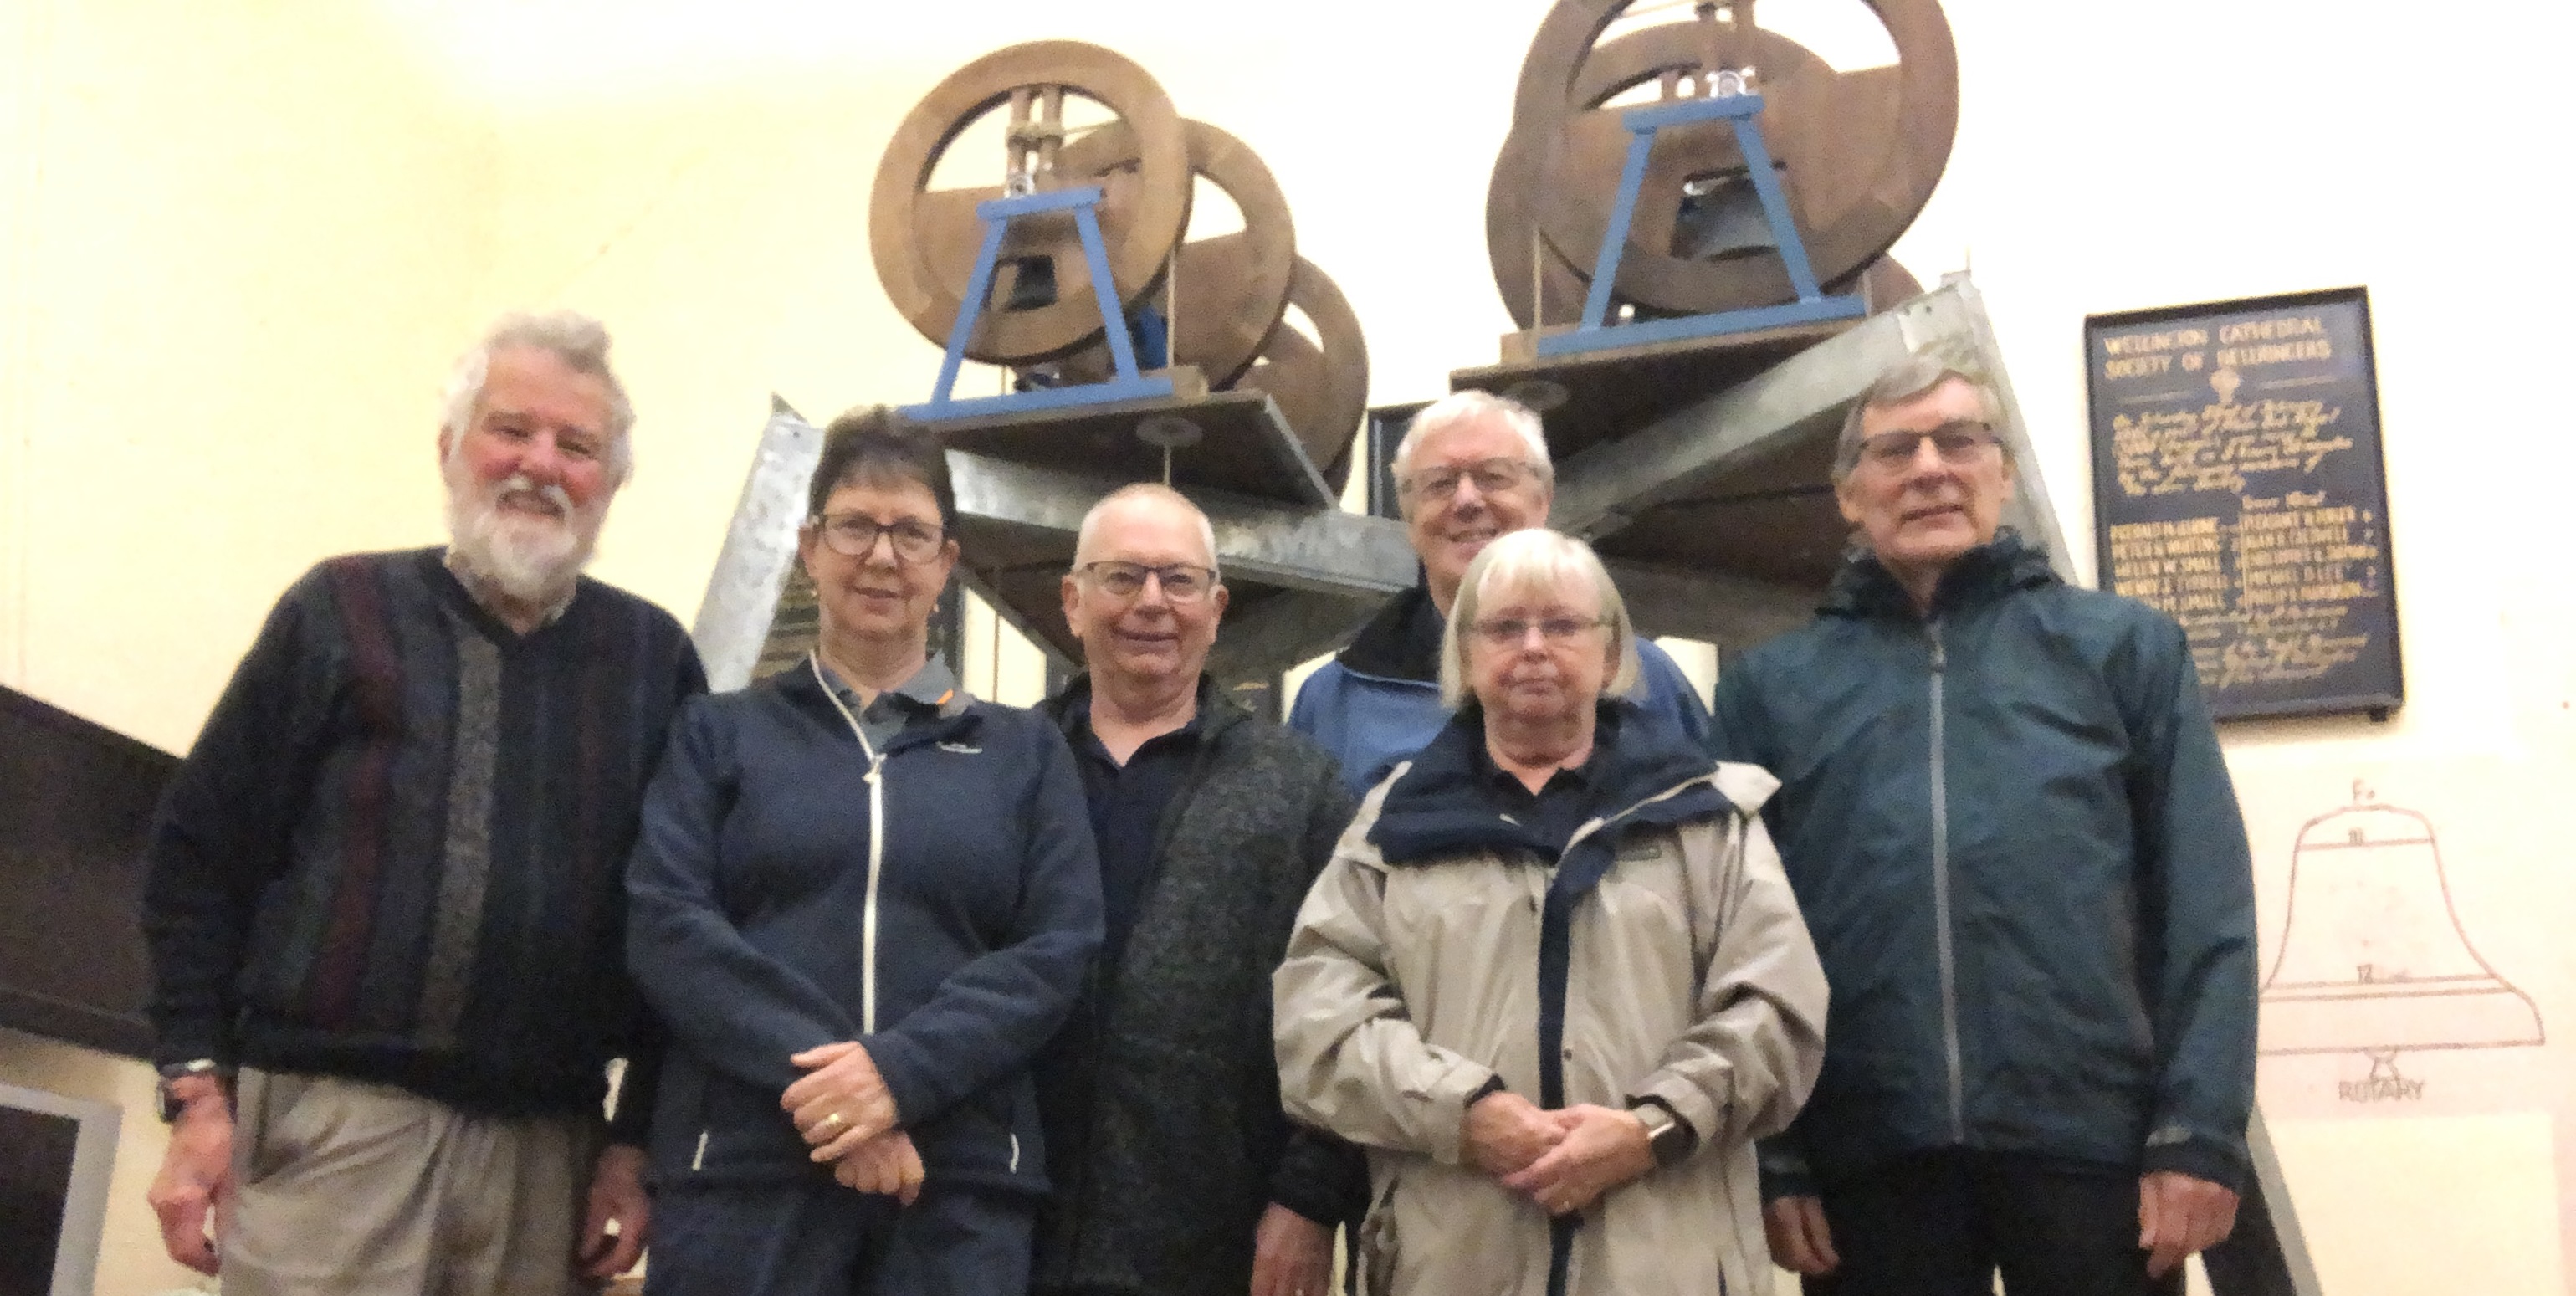 ringers in front of mini-ring